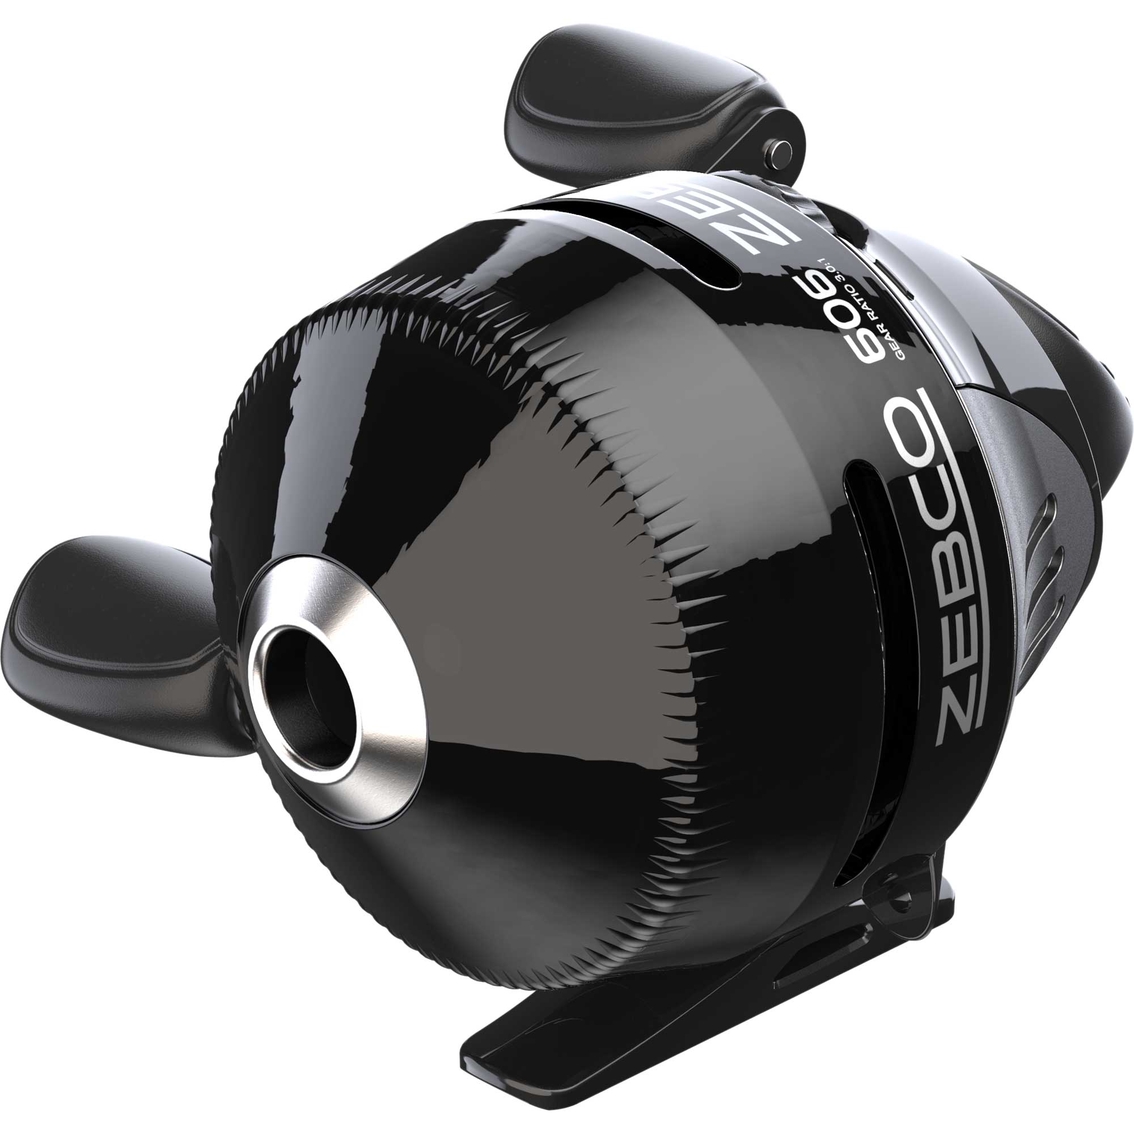 Zebco 606 Spin Cast Reel with 20 lb. Line - Image 3 of 5